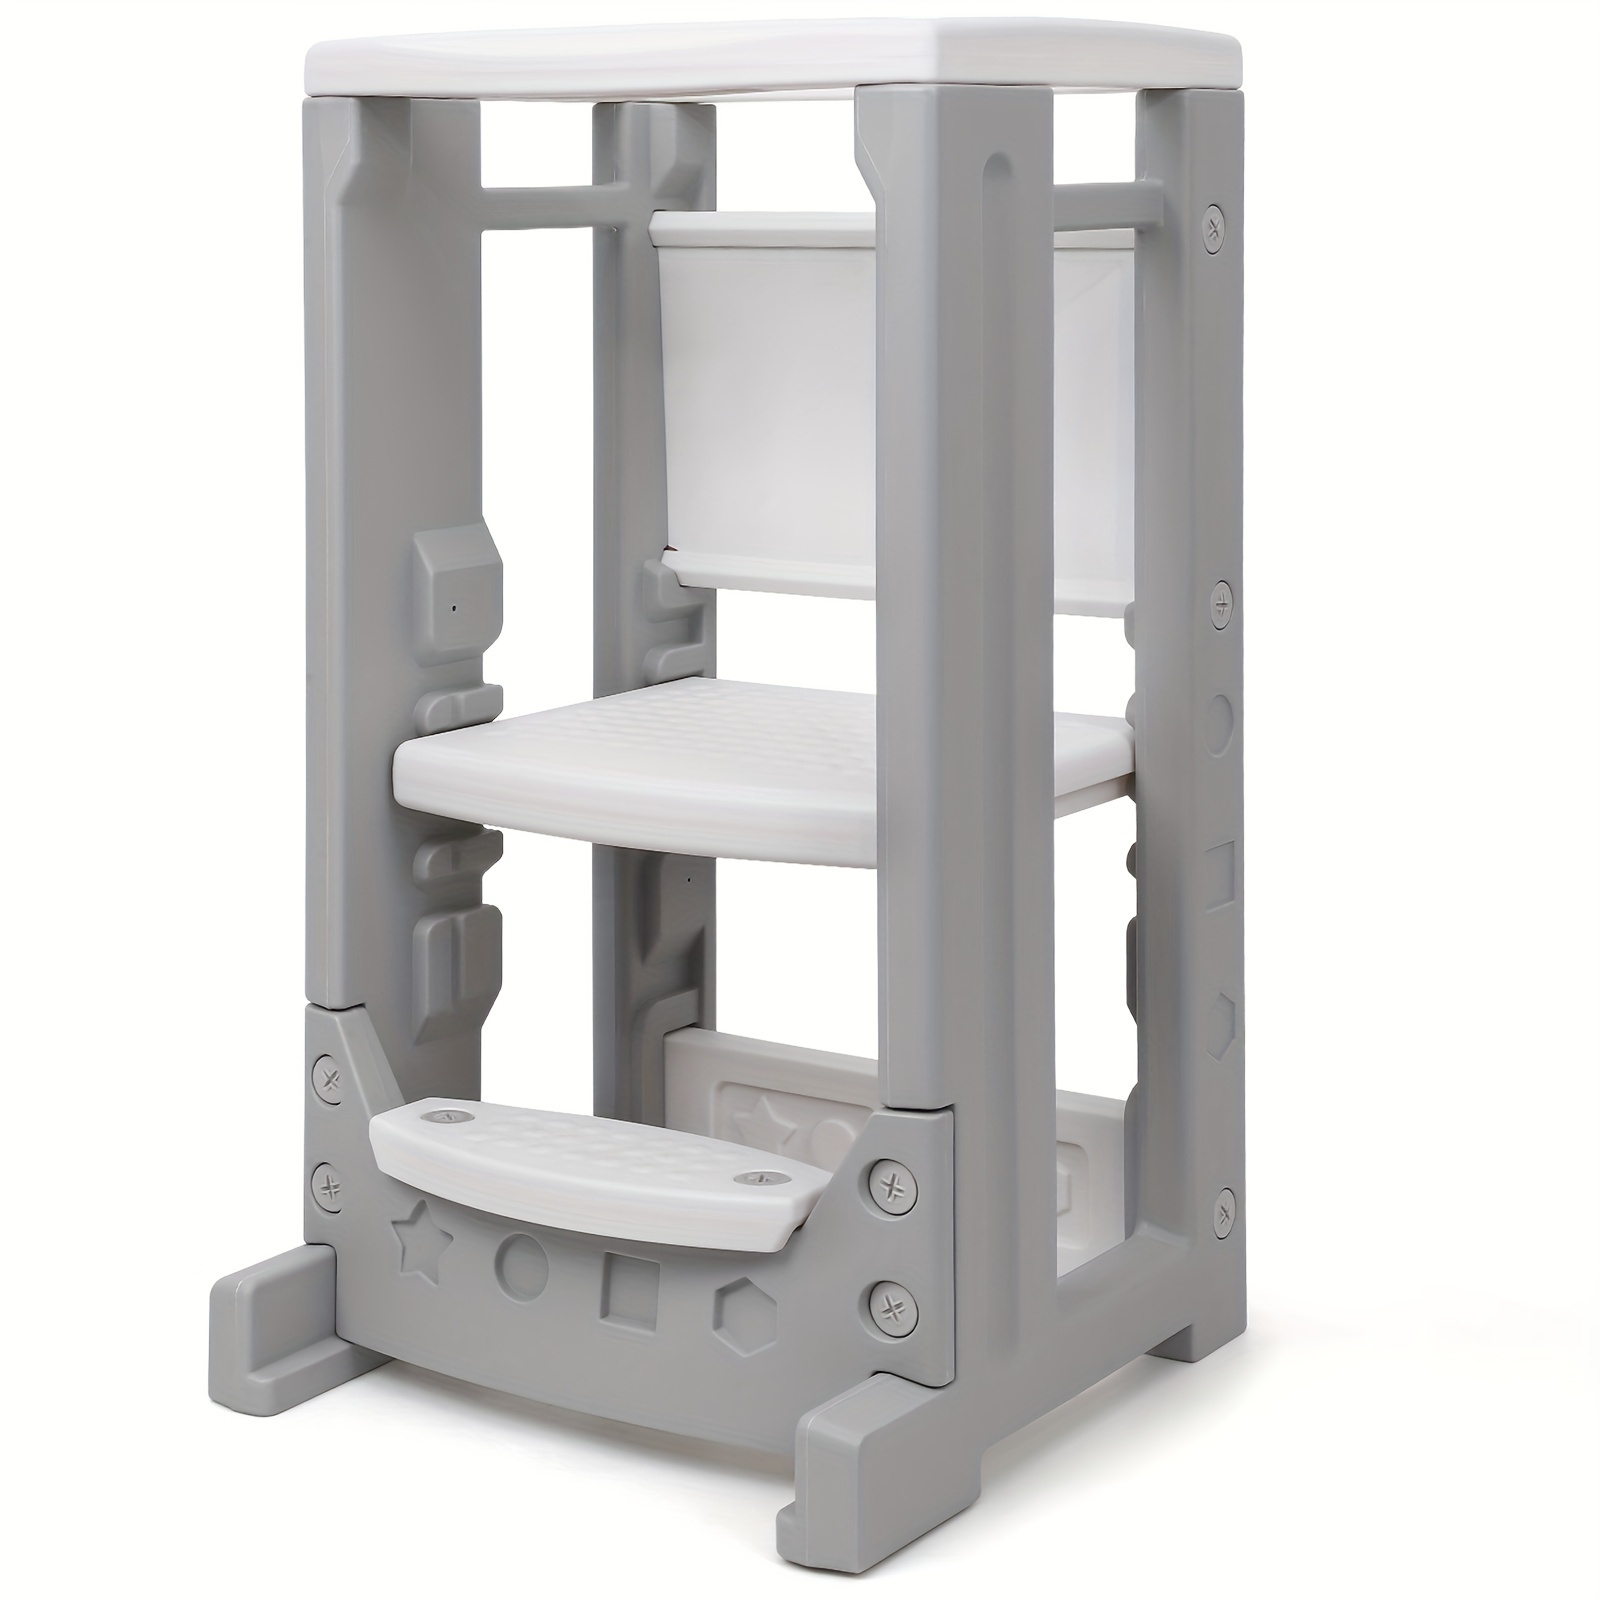 

Kids Kitchen Step Stool With Whiteboard, Toddler Tower With 4 Adjustable Heights & Safety Rail, Baby Children Learning Stool Toddler Kitchen Stool Helper For Bathroom Sink Kitchen Counter, Grey/white